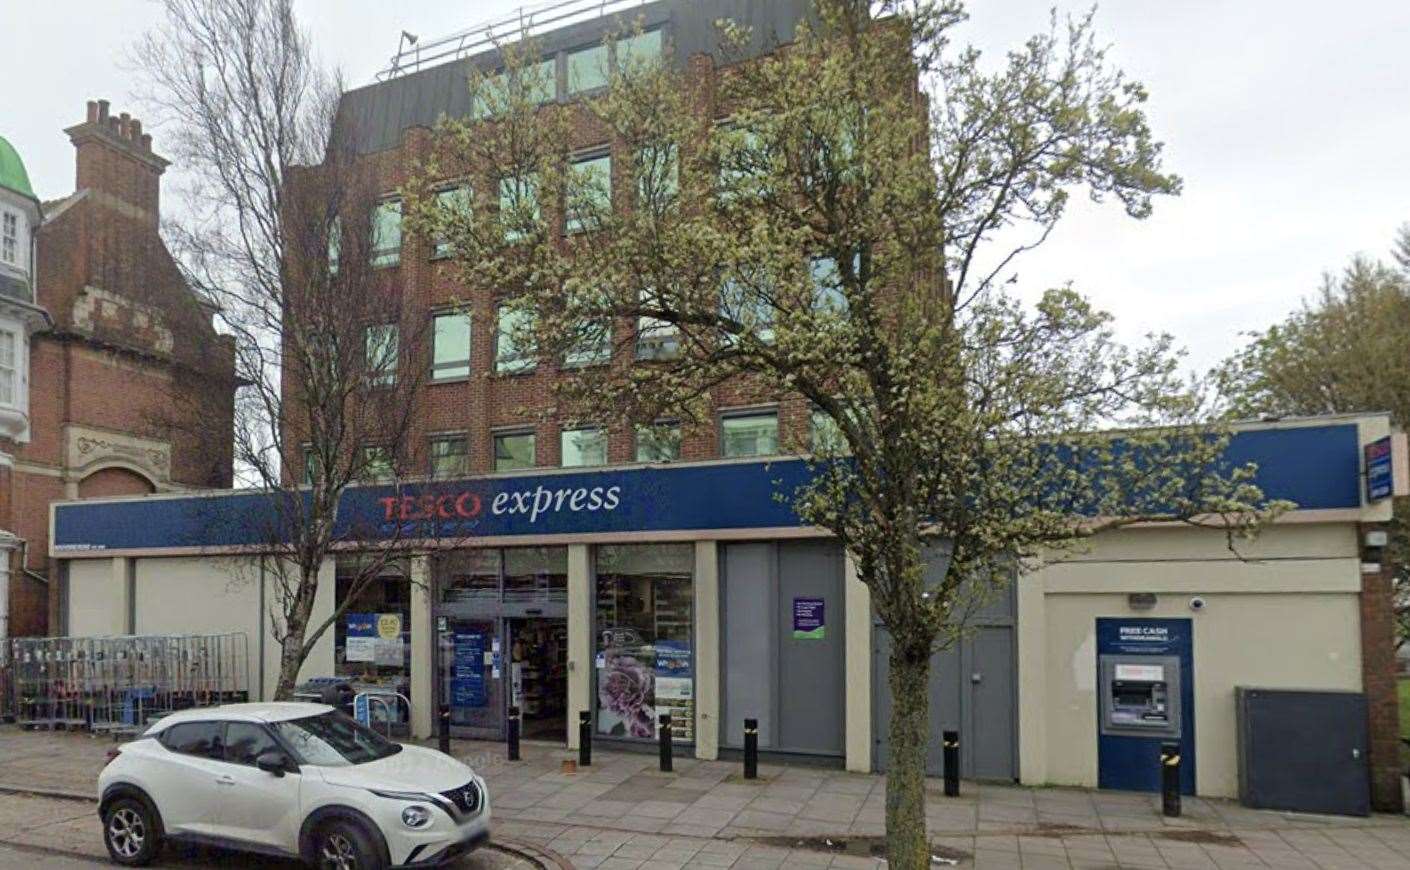 A man has been arrested after a sex assault at Tesco Express in Bouverie Road West, Folkestone. Picture: Google